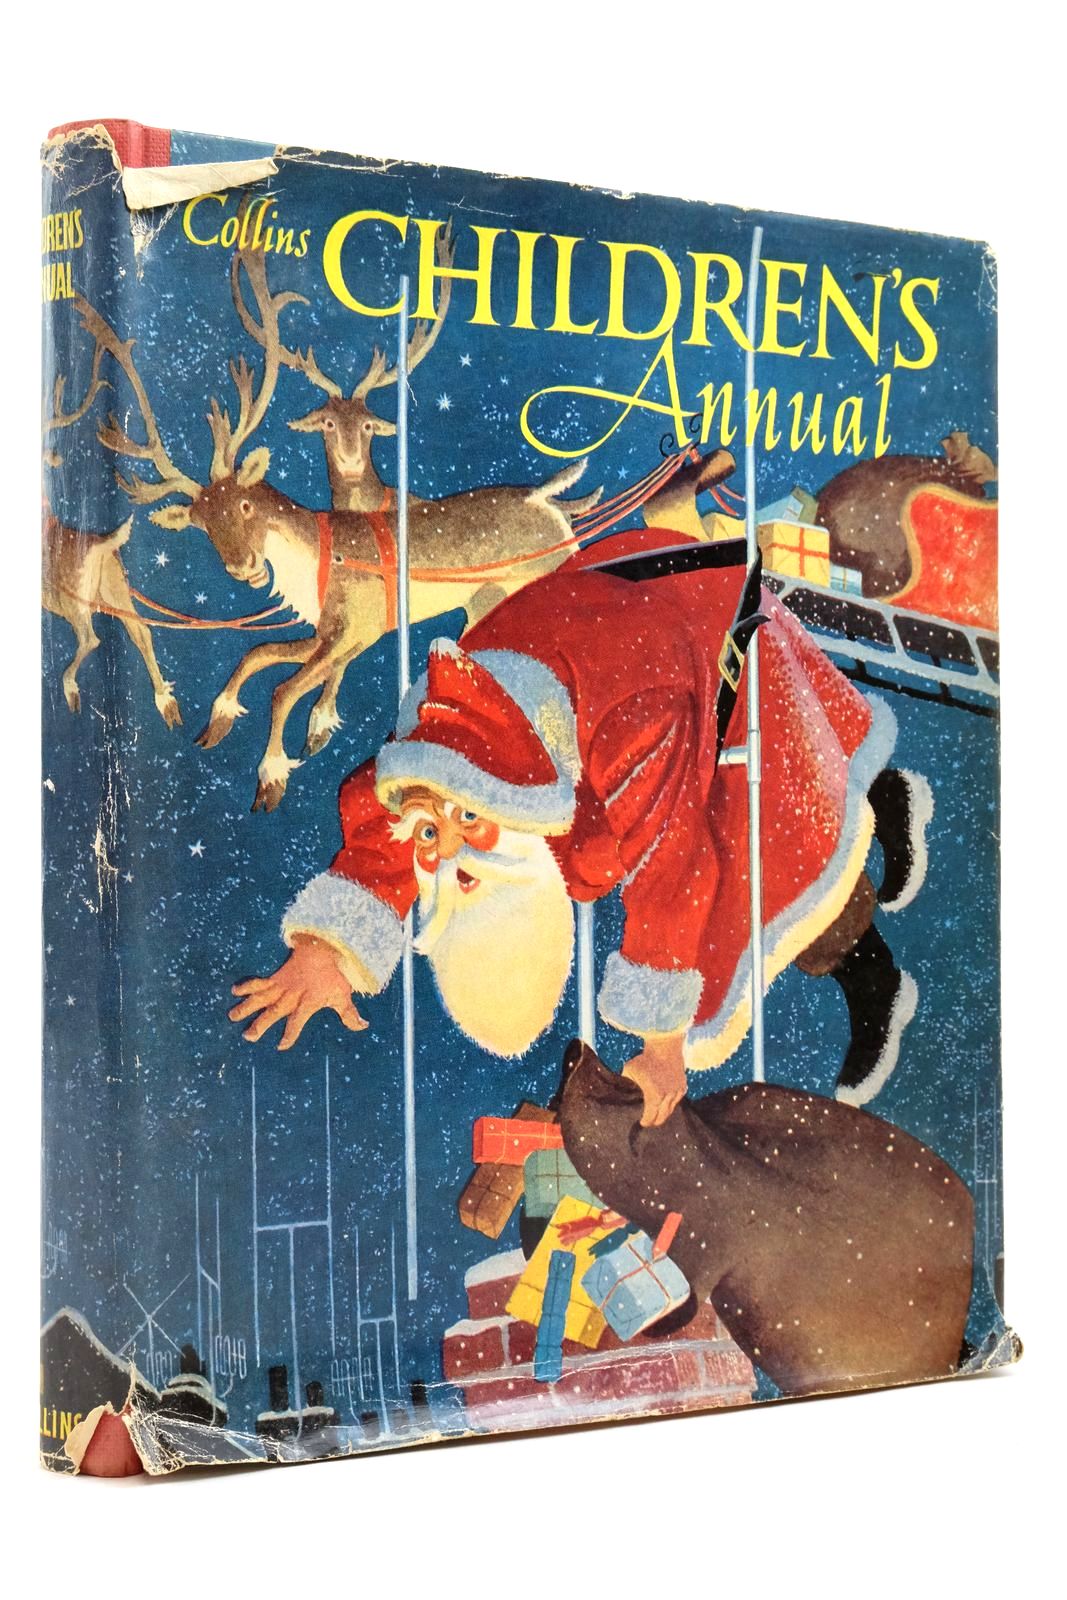 Photo of COLLINS CHILDREN'S ANNUAL written by Boyd, Edward Shaw, Jane Blyton, Enid et al,  illustrated by Boswell, Hilda Helps, Racey Heap, Jean Walmsley et al.,  published by Collins (STOCK CODE: 2138901)  for sale by Stella & Rose's Books